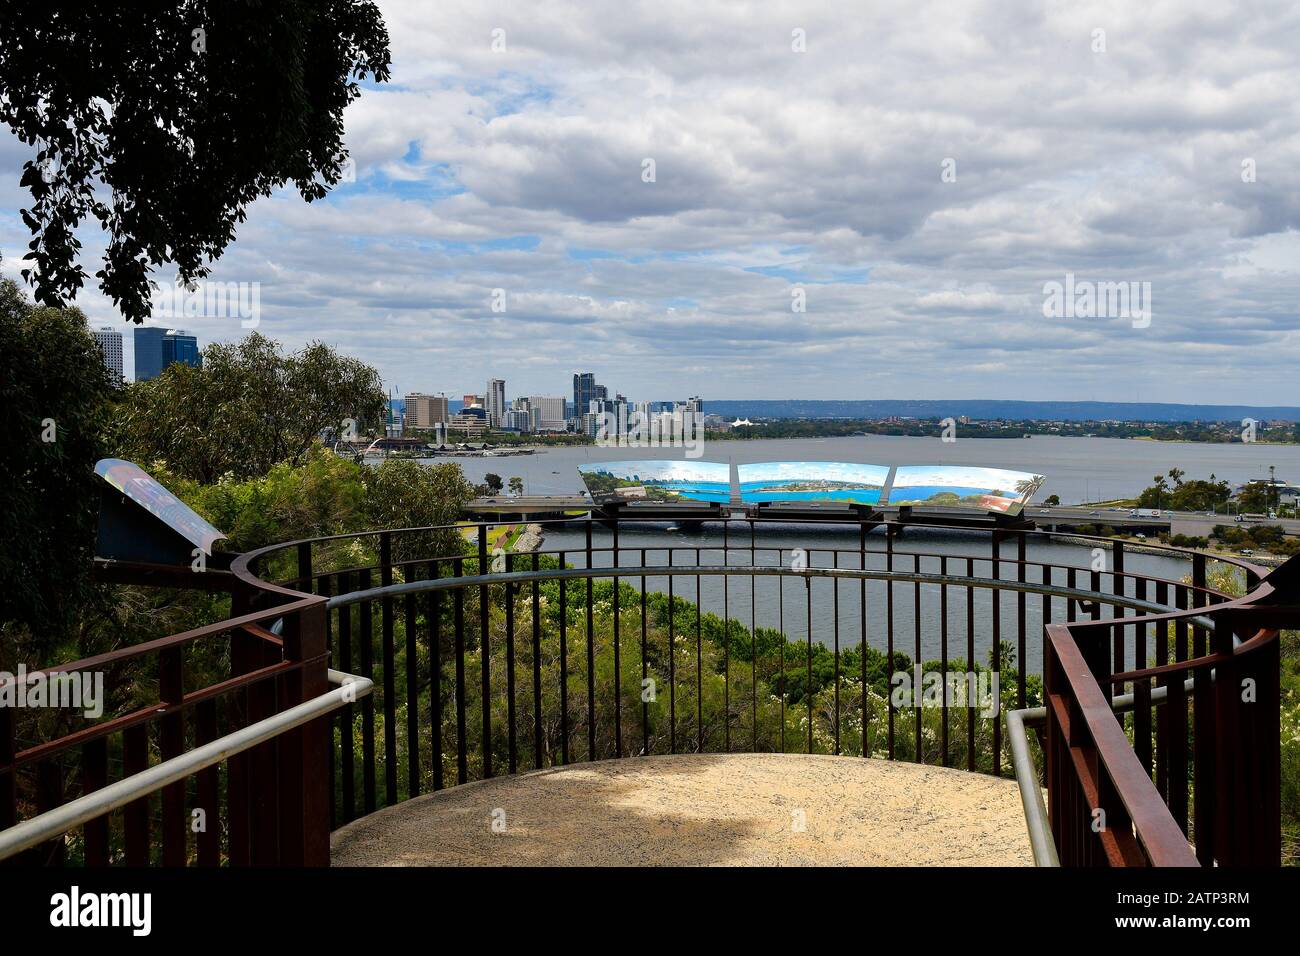 Perth, WA, Australia - November 29, 2017: cityscape with Swan river from viewing point in public Kings park Stock Photo